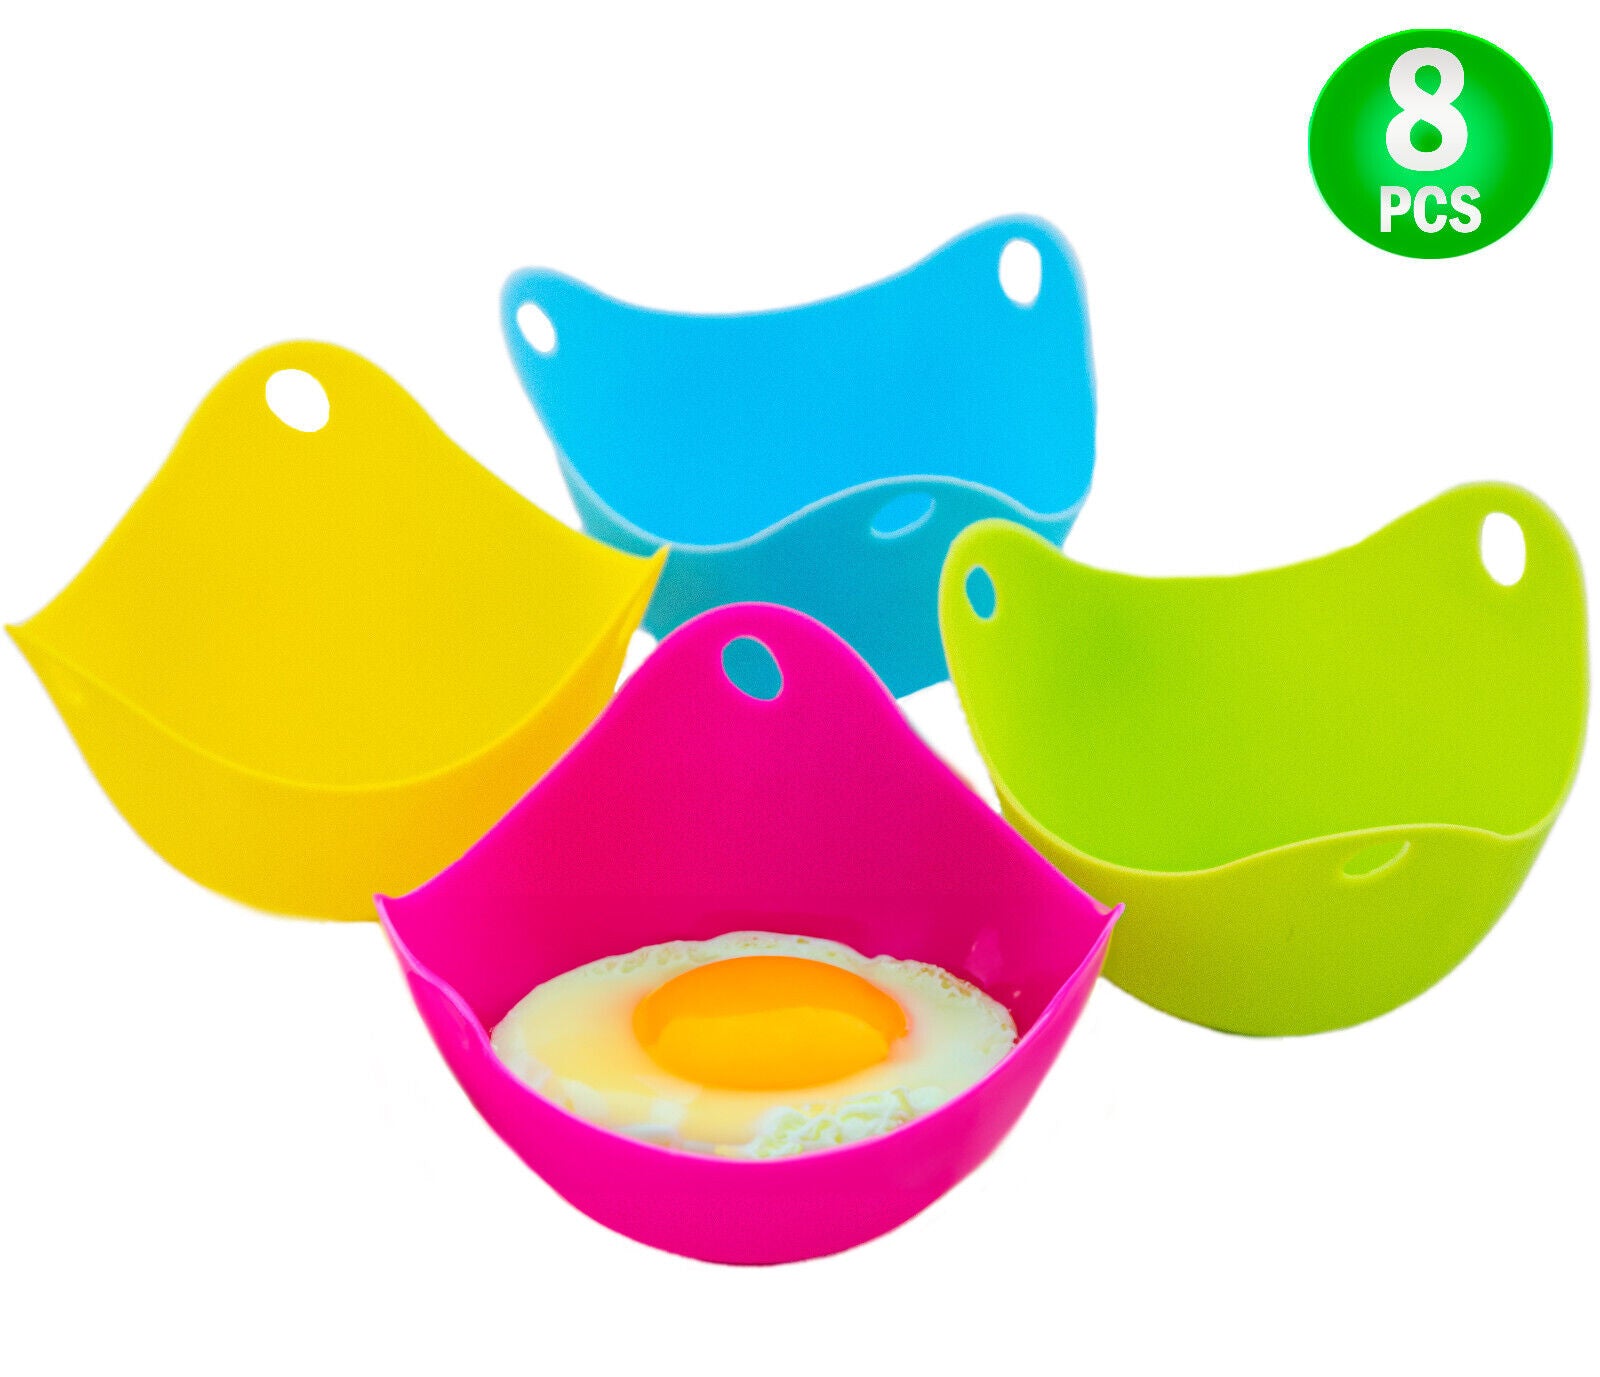 4 or 8 pcs Silicon Egg Poacher Cups- Microwave & Stovetop